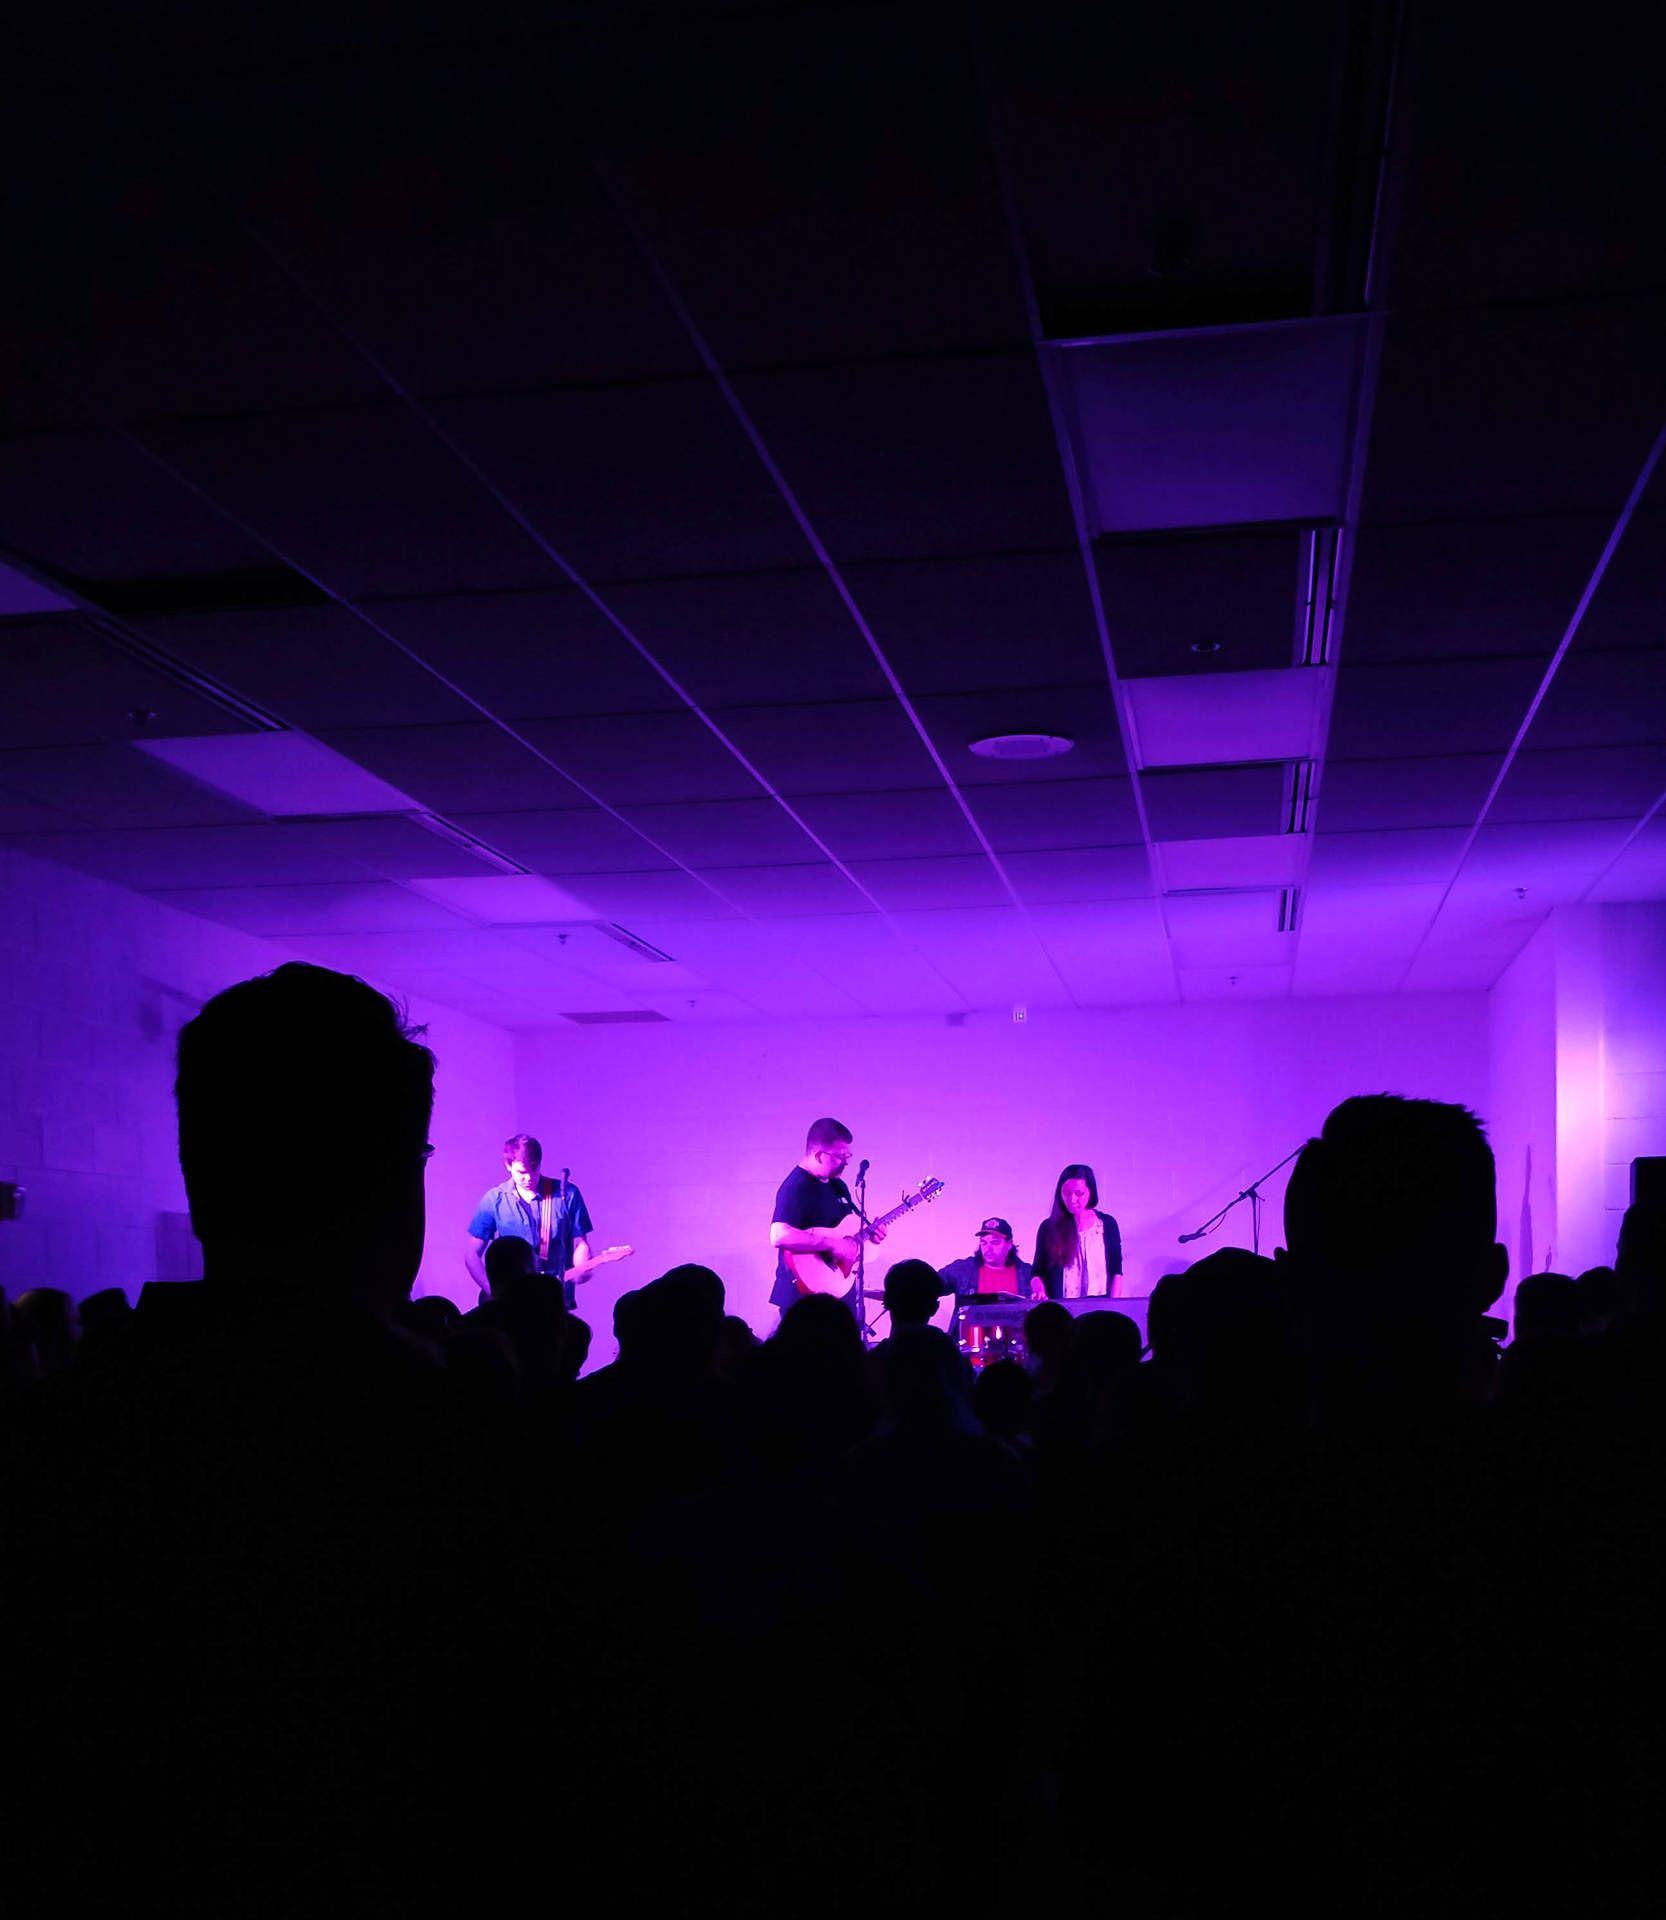 Acoustic Concert With Light Purple Lighting